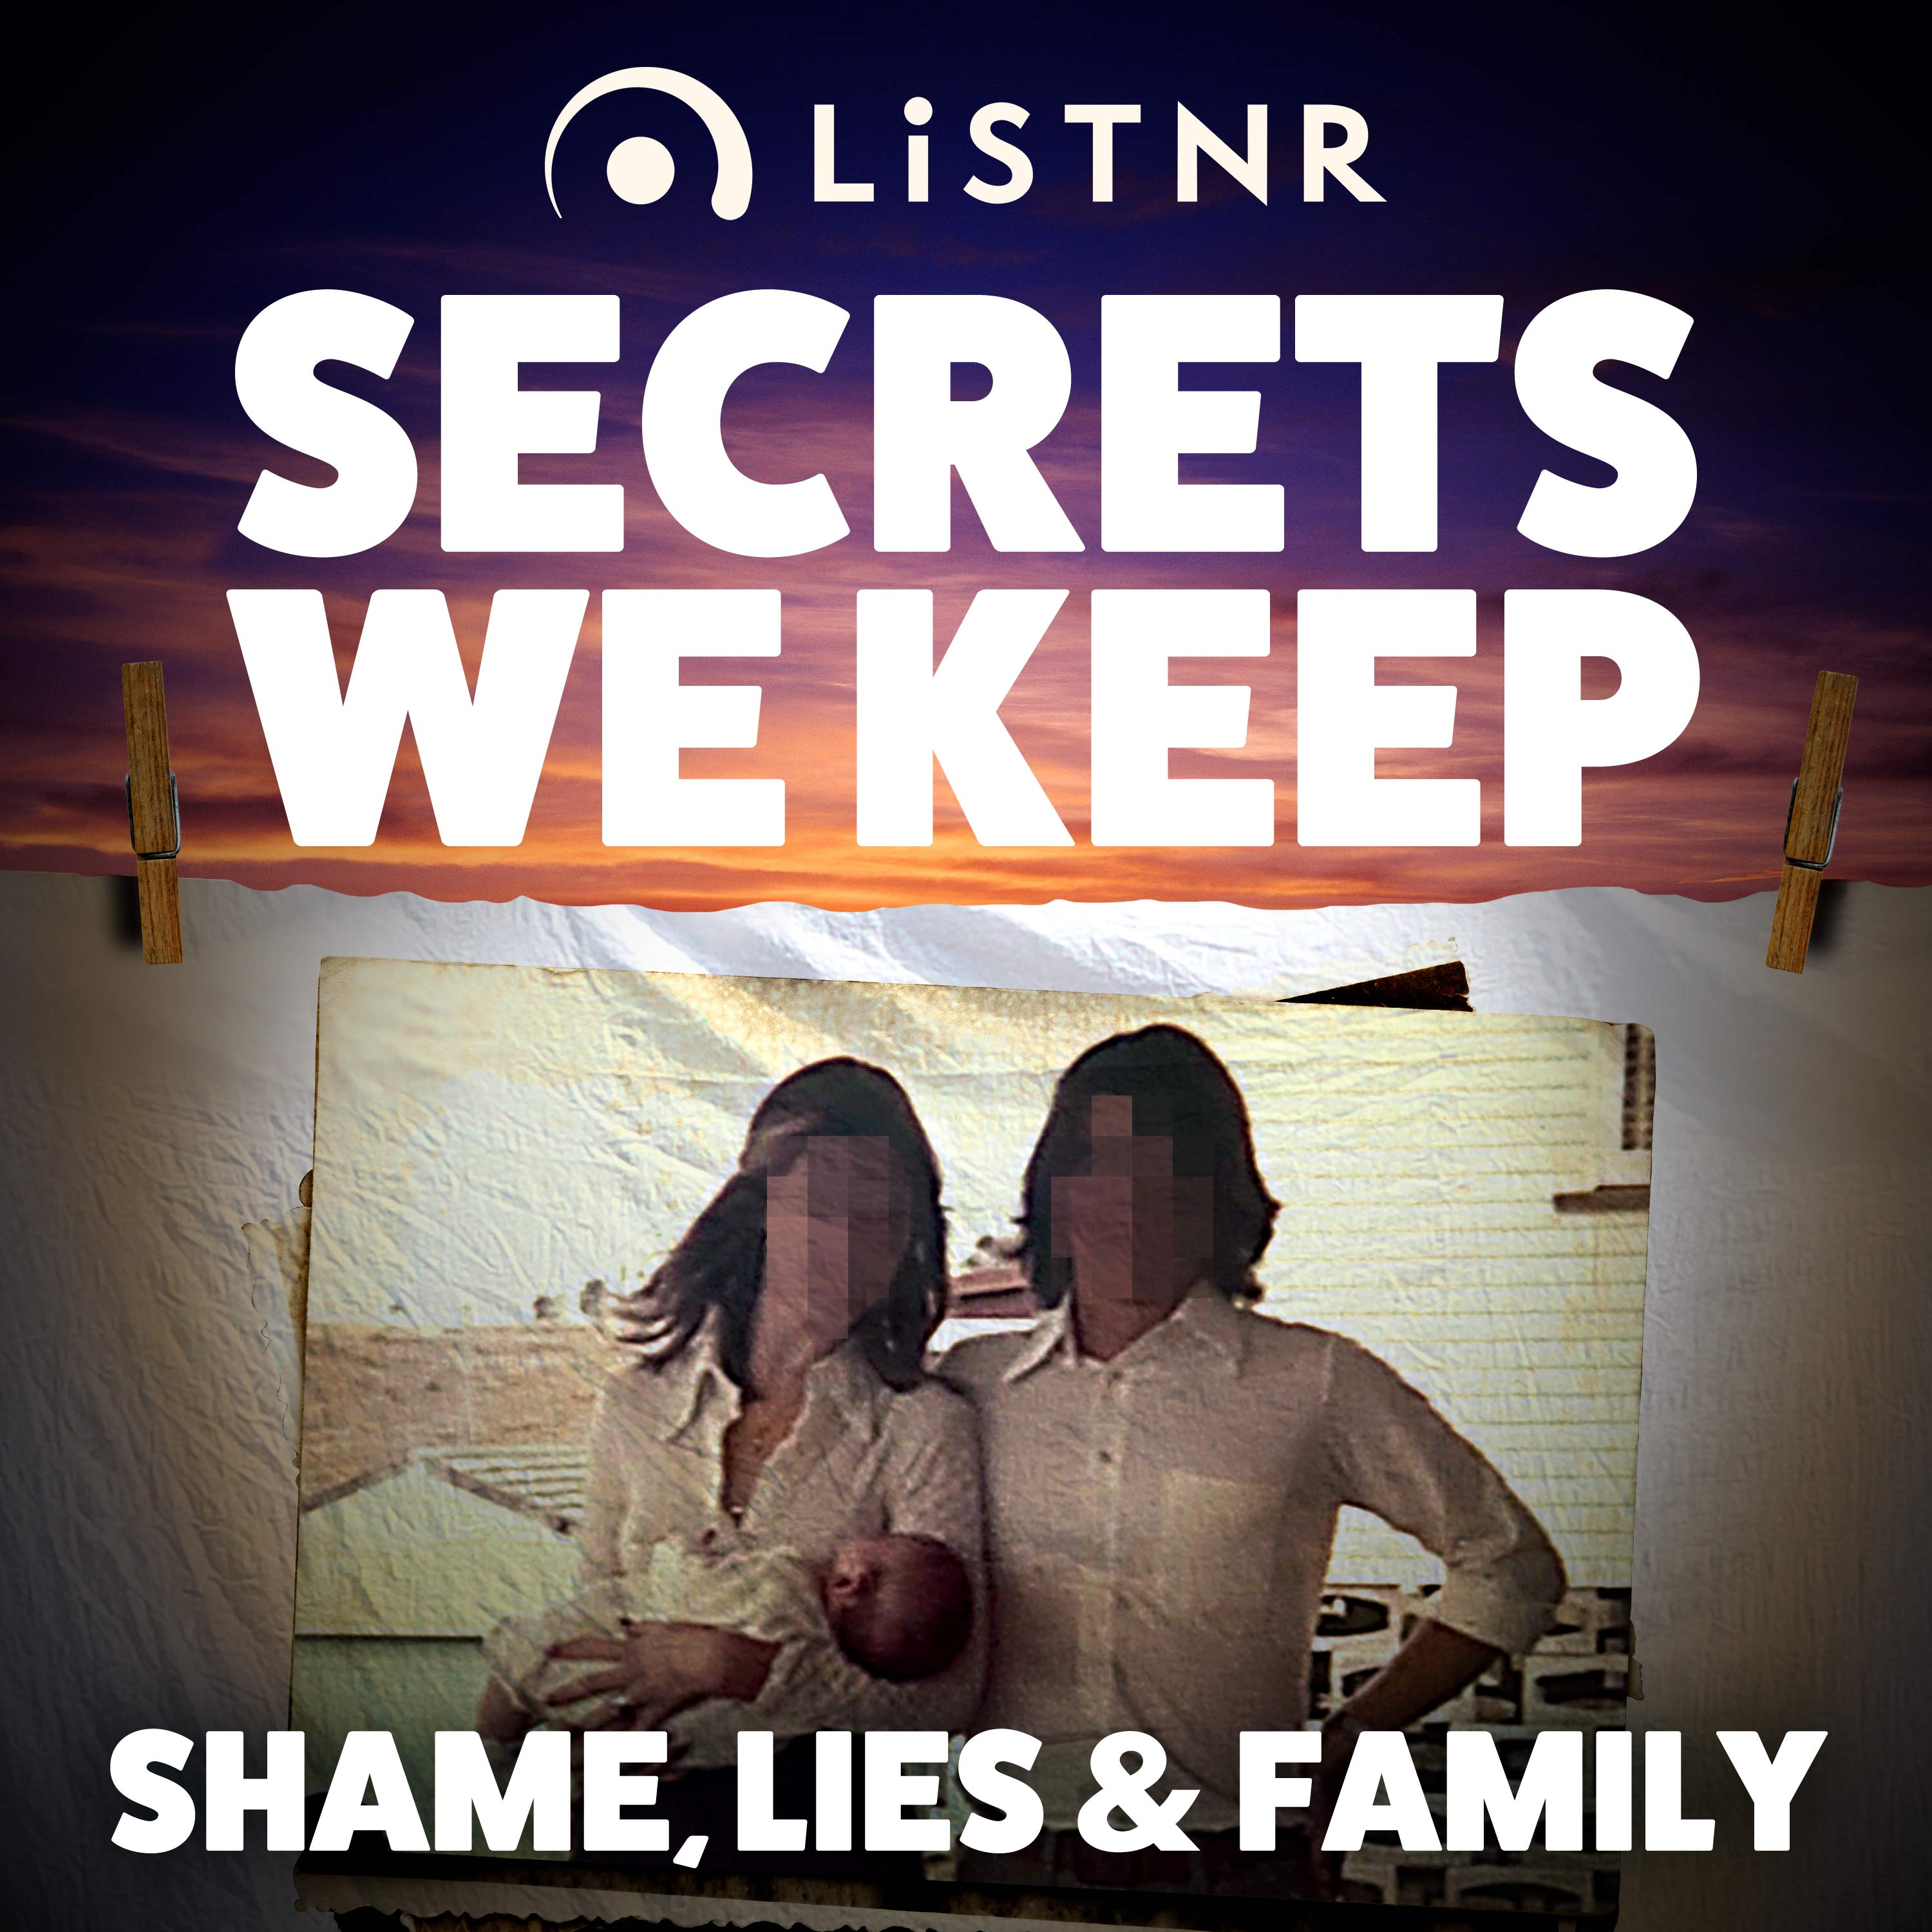 Shame, Lies & Family - Finding your family